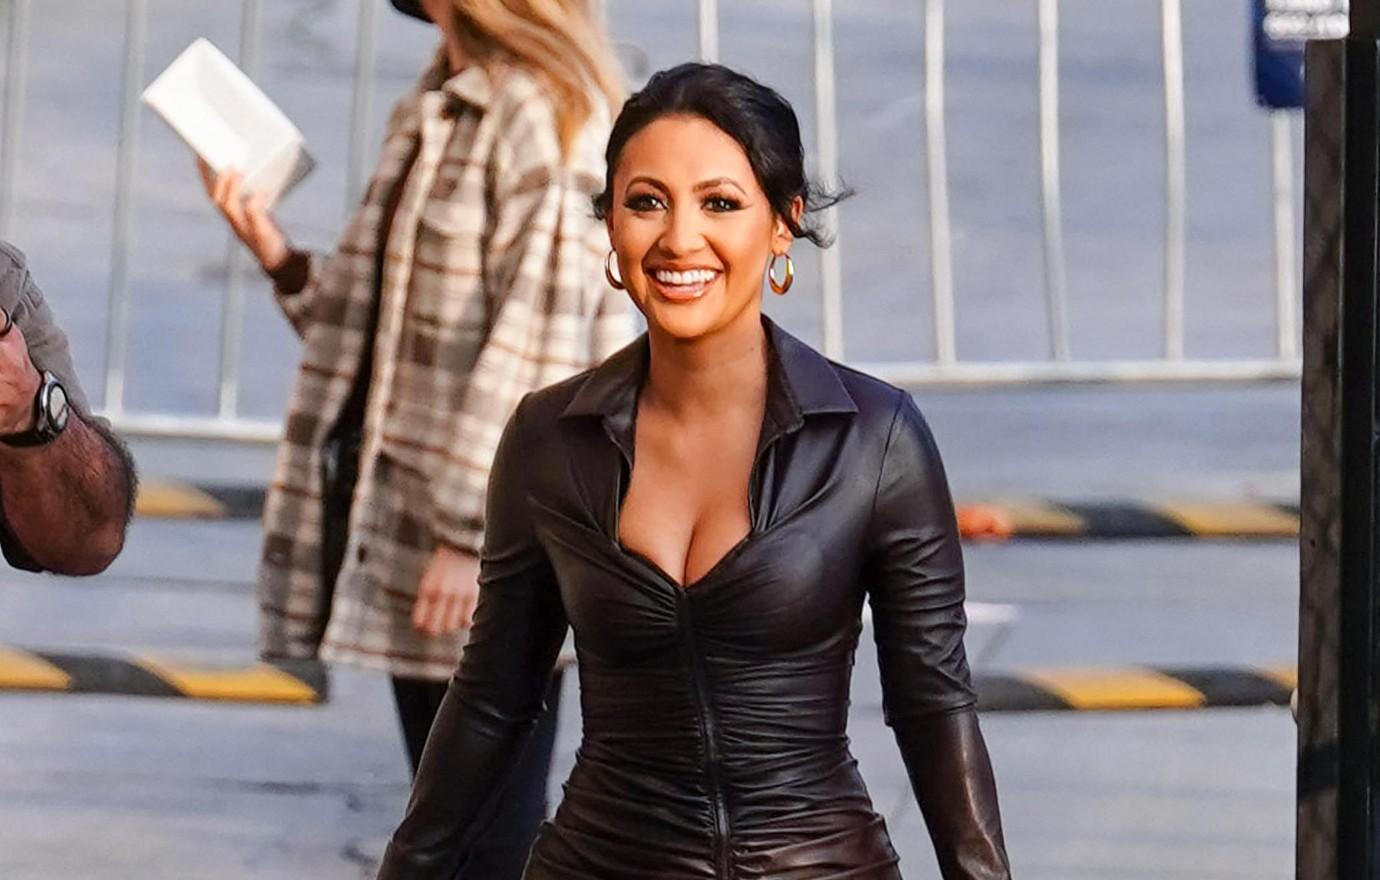 Francia Raisa Is 'Happy' Being Single Without Kids at Age 34